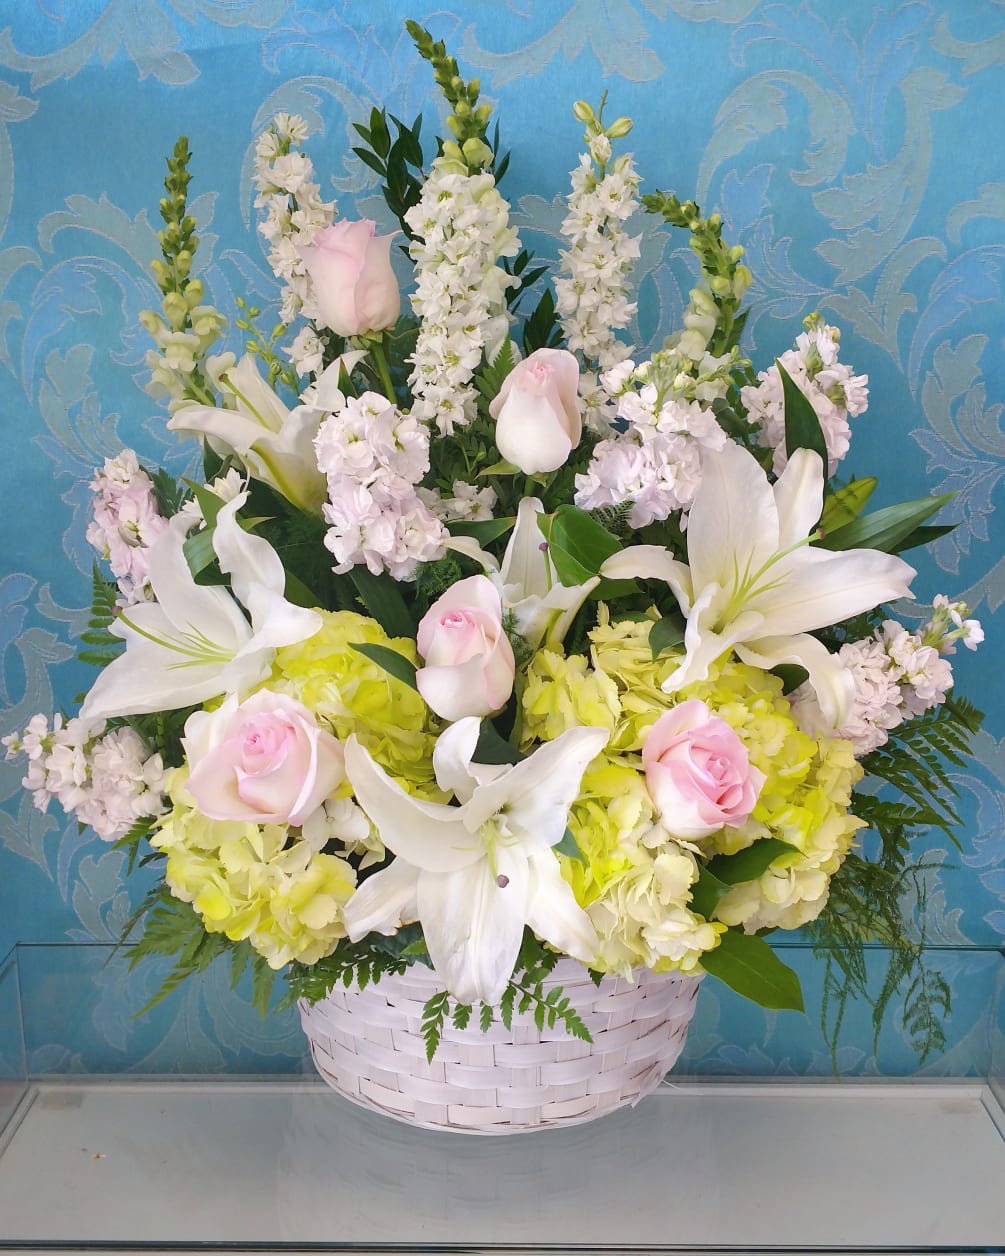 This large whicker basket is designed with soft green hydrangea, large white